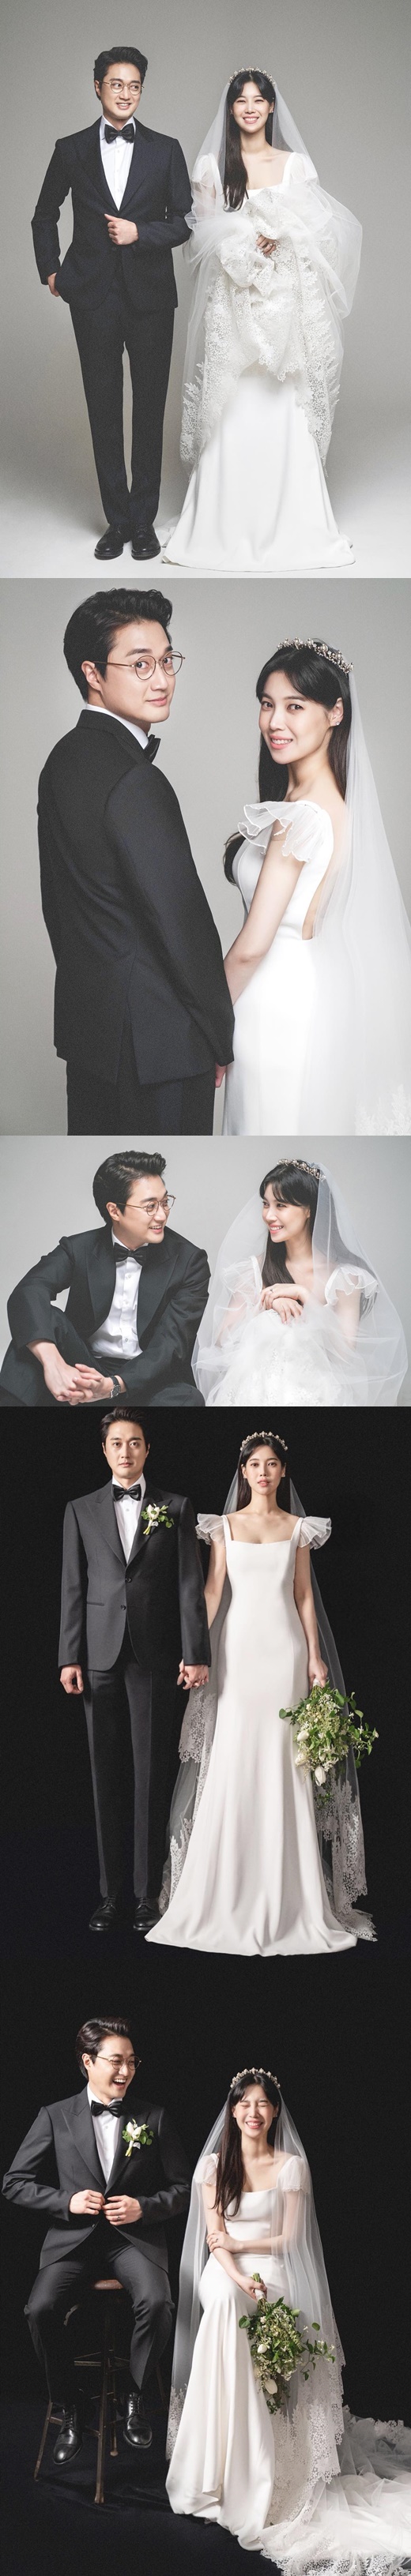 Peppertons Lee Jang-won wife Bae Da Hae has unveiled a wedding pictorial.Musical actor Bae Da Hae posted a wedding picture on his instagram on the afternoon of the 15th with a message Now 3 months.The photo featured a lovely two-shot of the good-looking couple Lee Jang-won and Bae Da Hae.Lee Jang-won made the tuxedo warm, and Bae Da Hae posed affectionately in a pure white dress.The couple married in November last year.